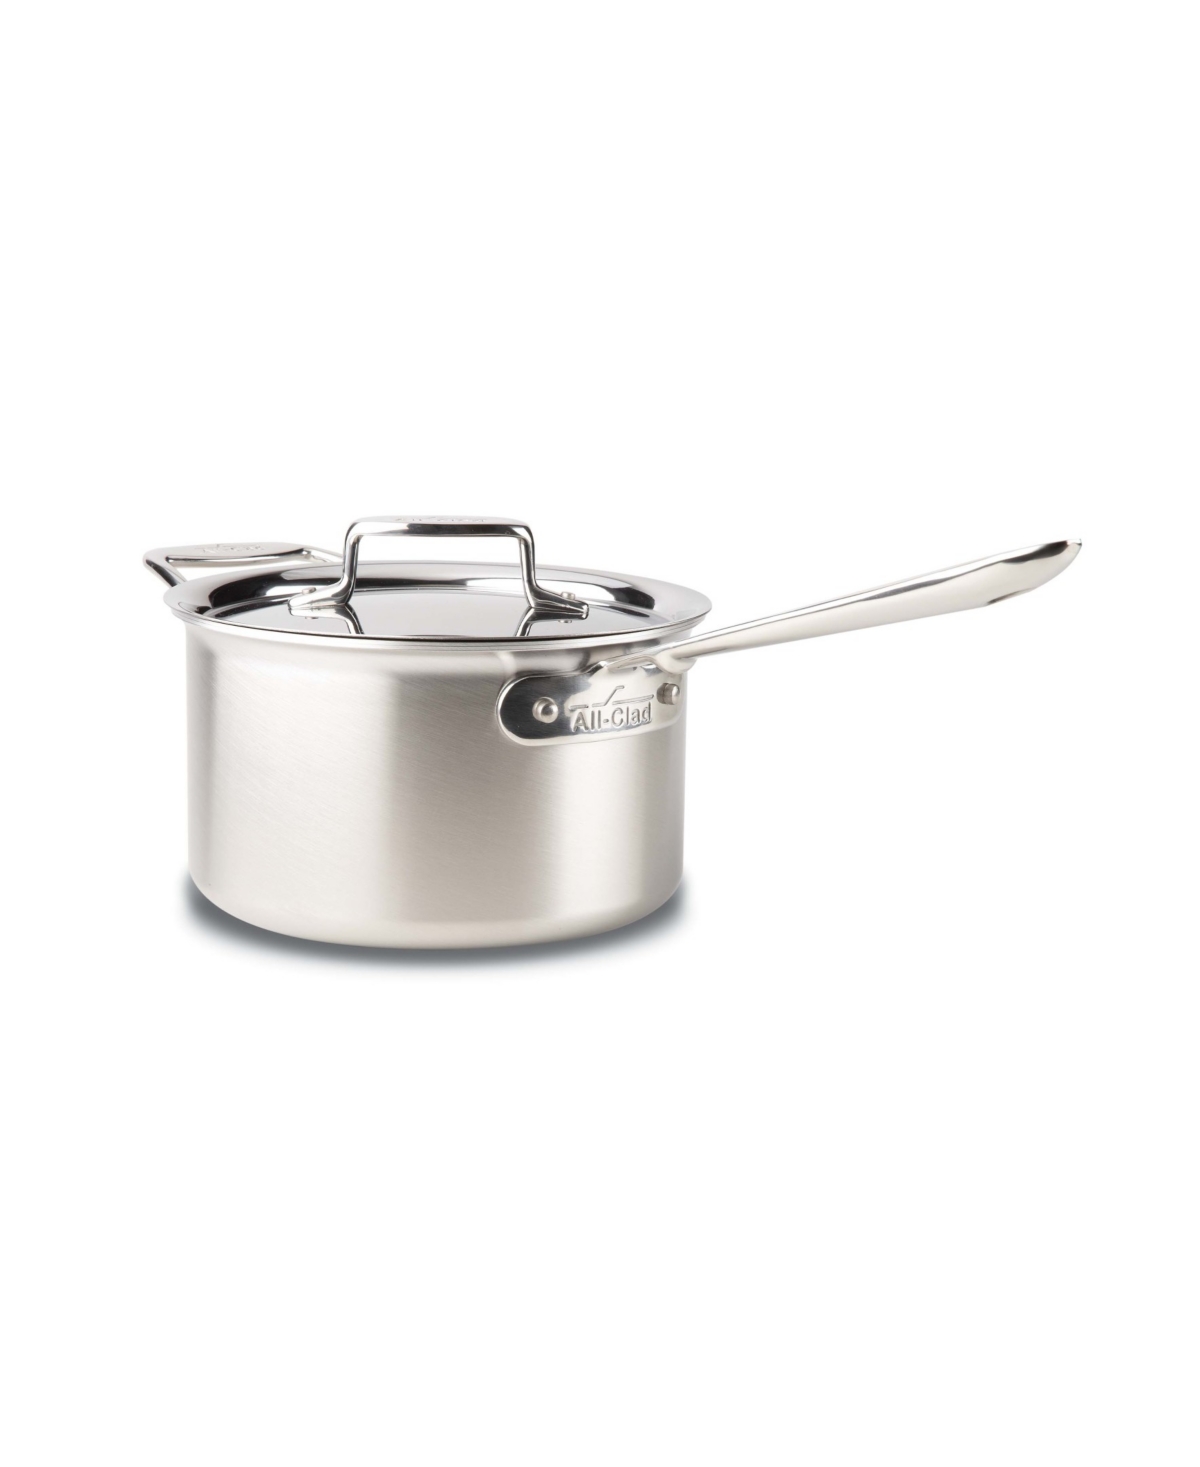 All-clad D5 Stainless Steel Brushed 5-ply Bonded 4-quart Sauce Pan With Lid In Silver